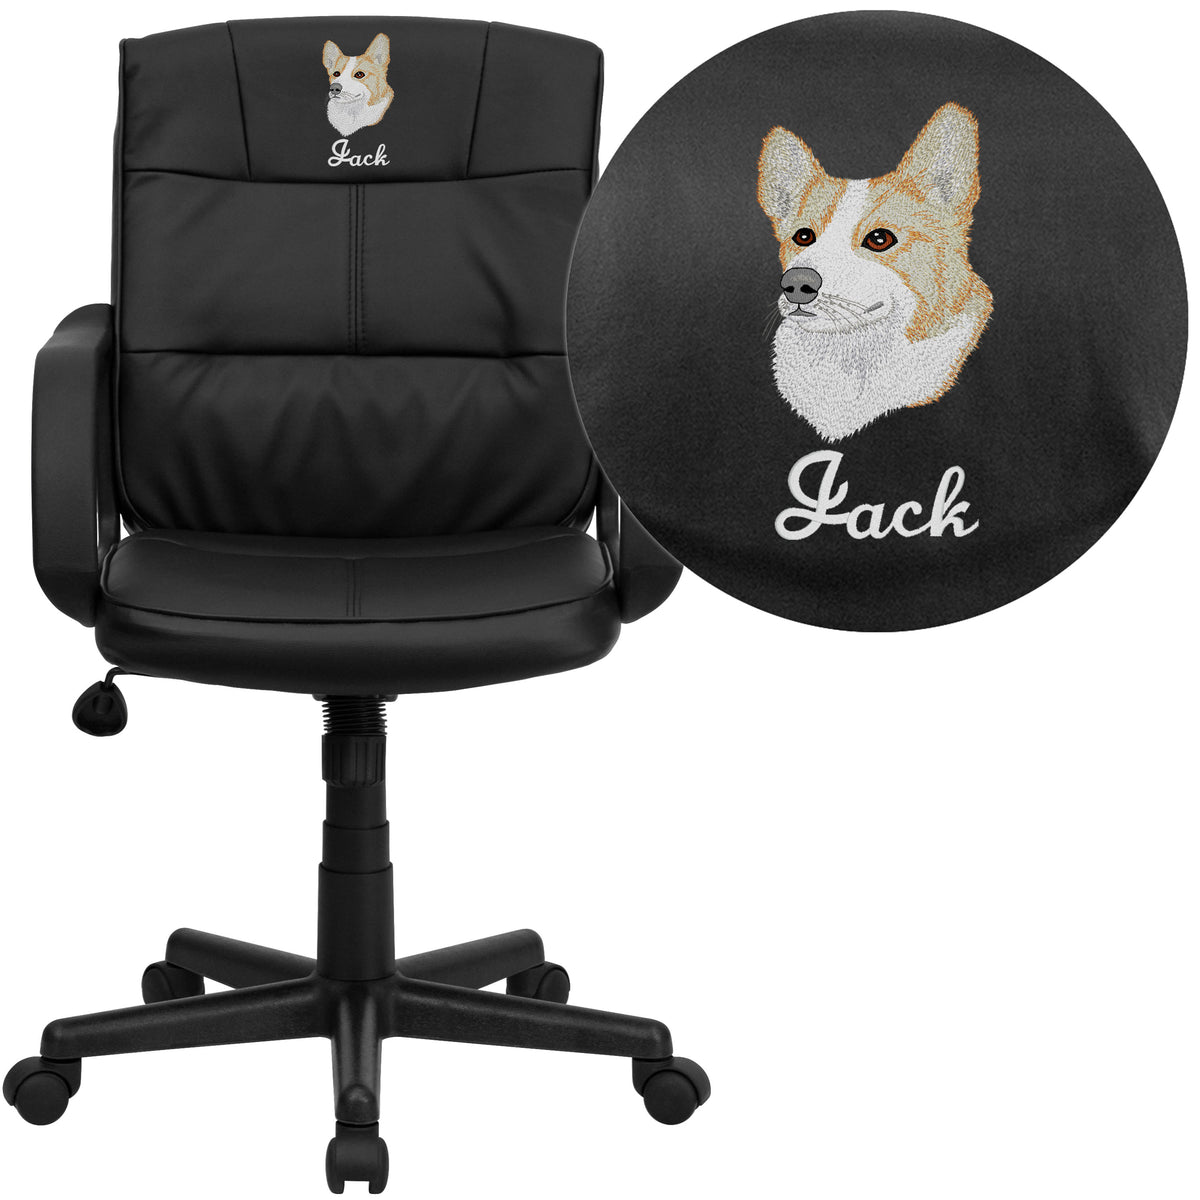 Embroidered Mid-Back Black LeatherSoft Swivel Task Office Chair with Arms